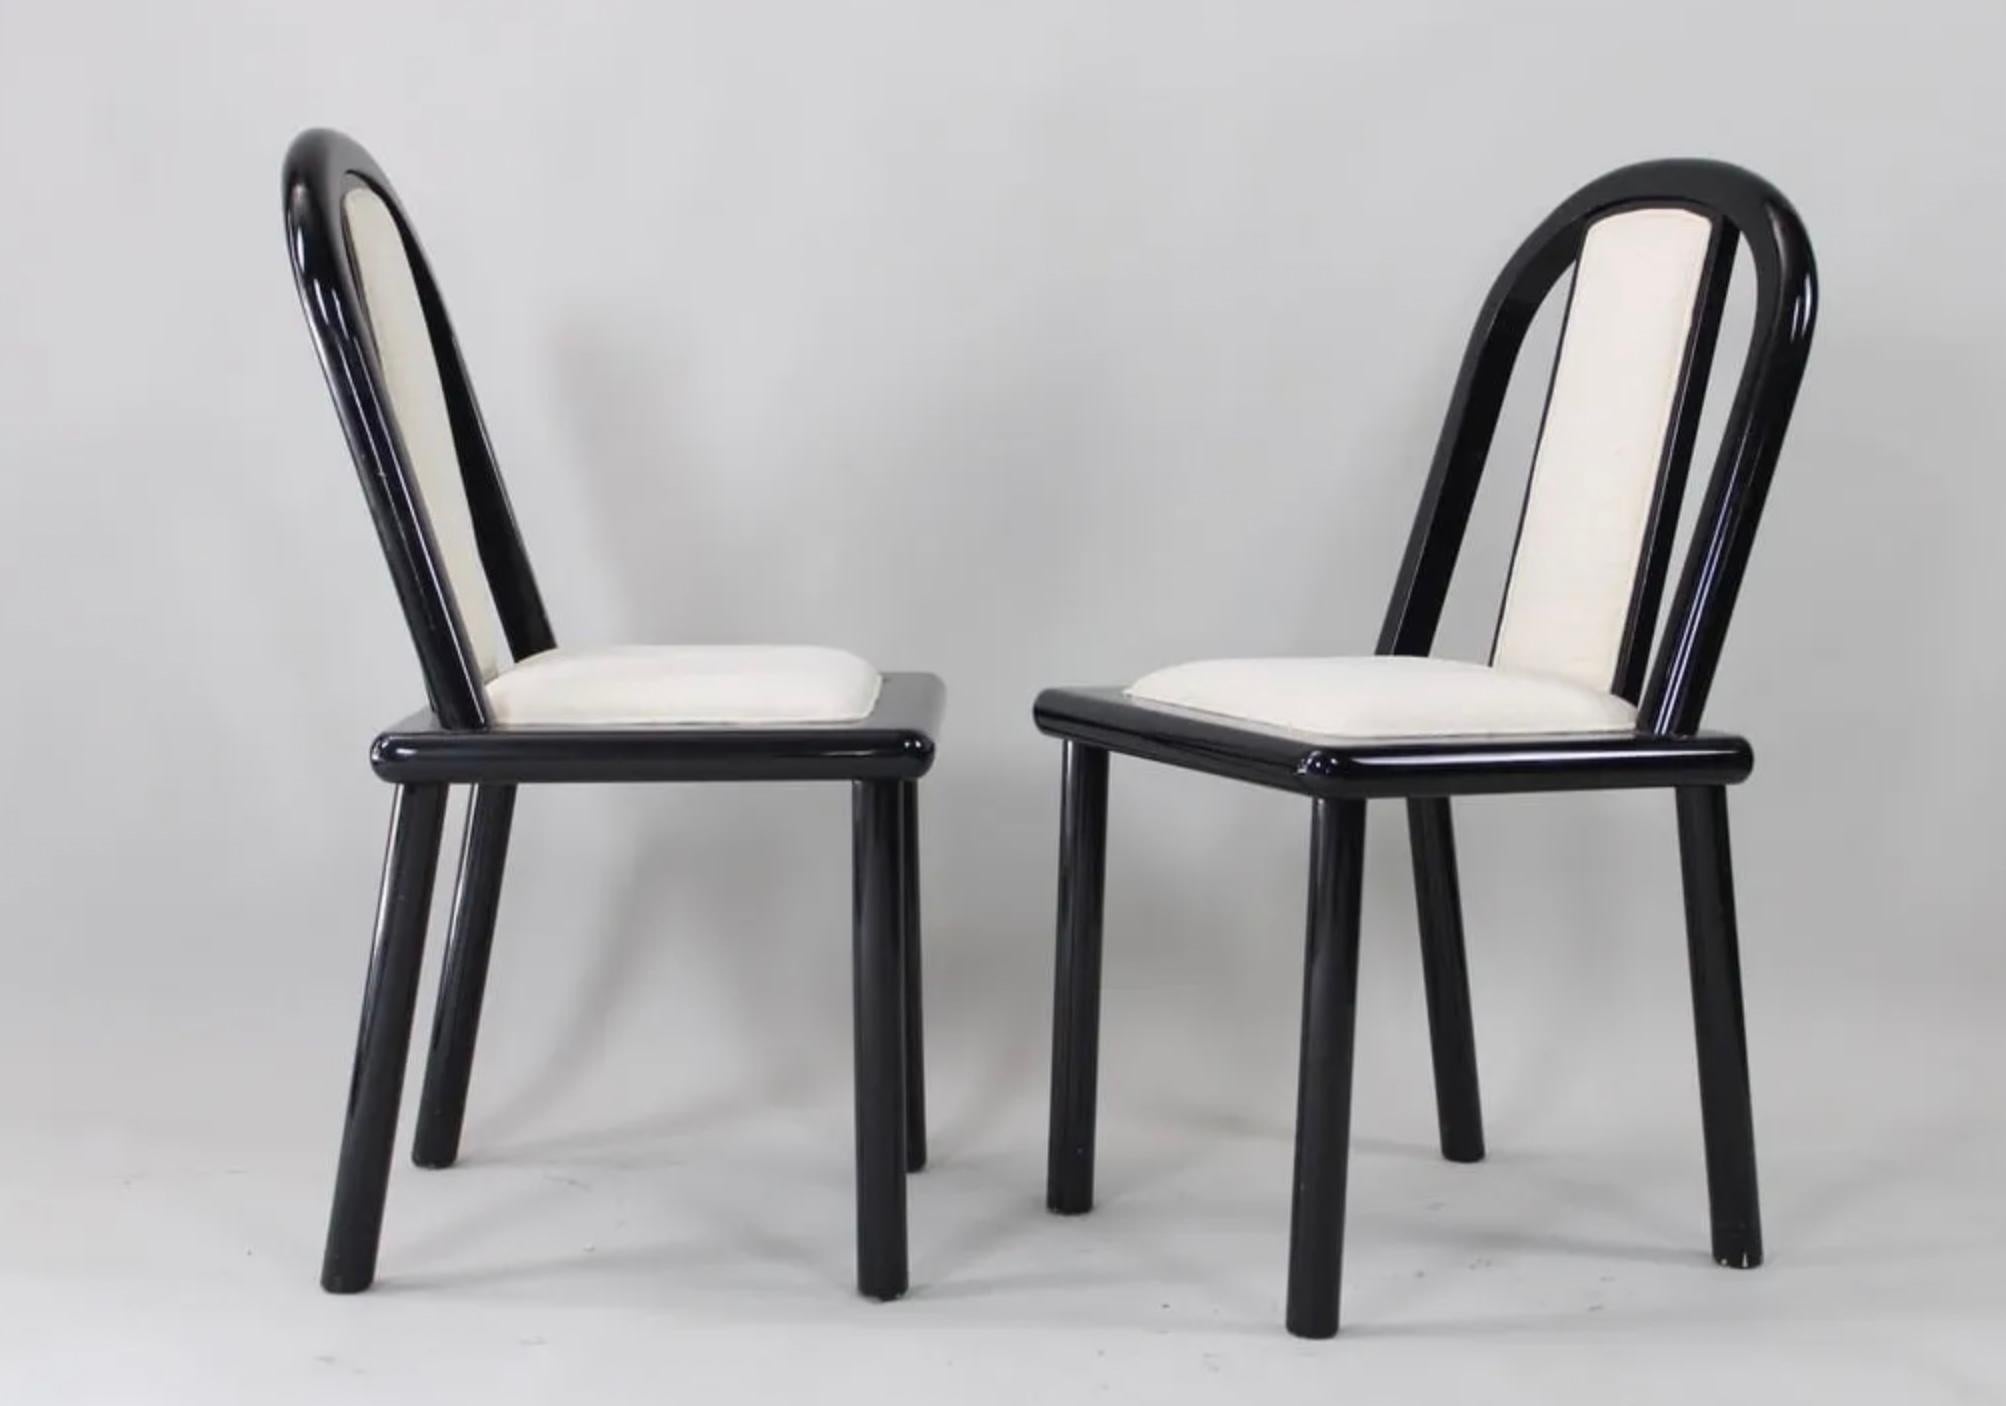 4 Post Modern Black Lacquer curved dining chairs Robert Mallet Stevens / Memphis Milano Style. Very unique set of (4) Dining chairs in good vintage condition. Black Lacquer painted wood frames with off-white upholstery. Made in USA Circa 1980.